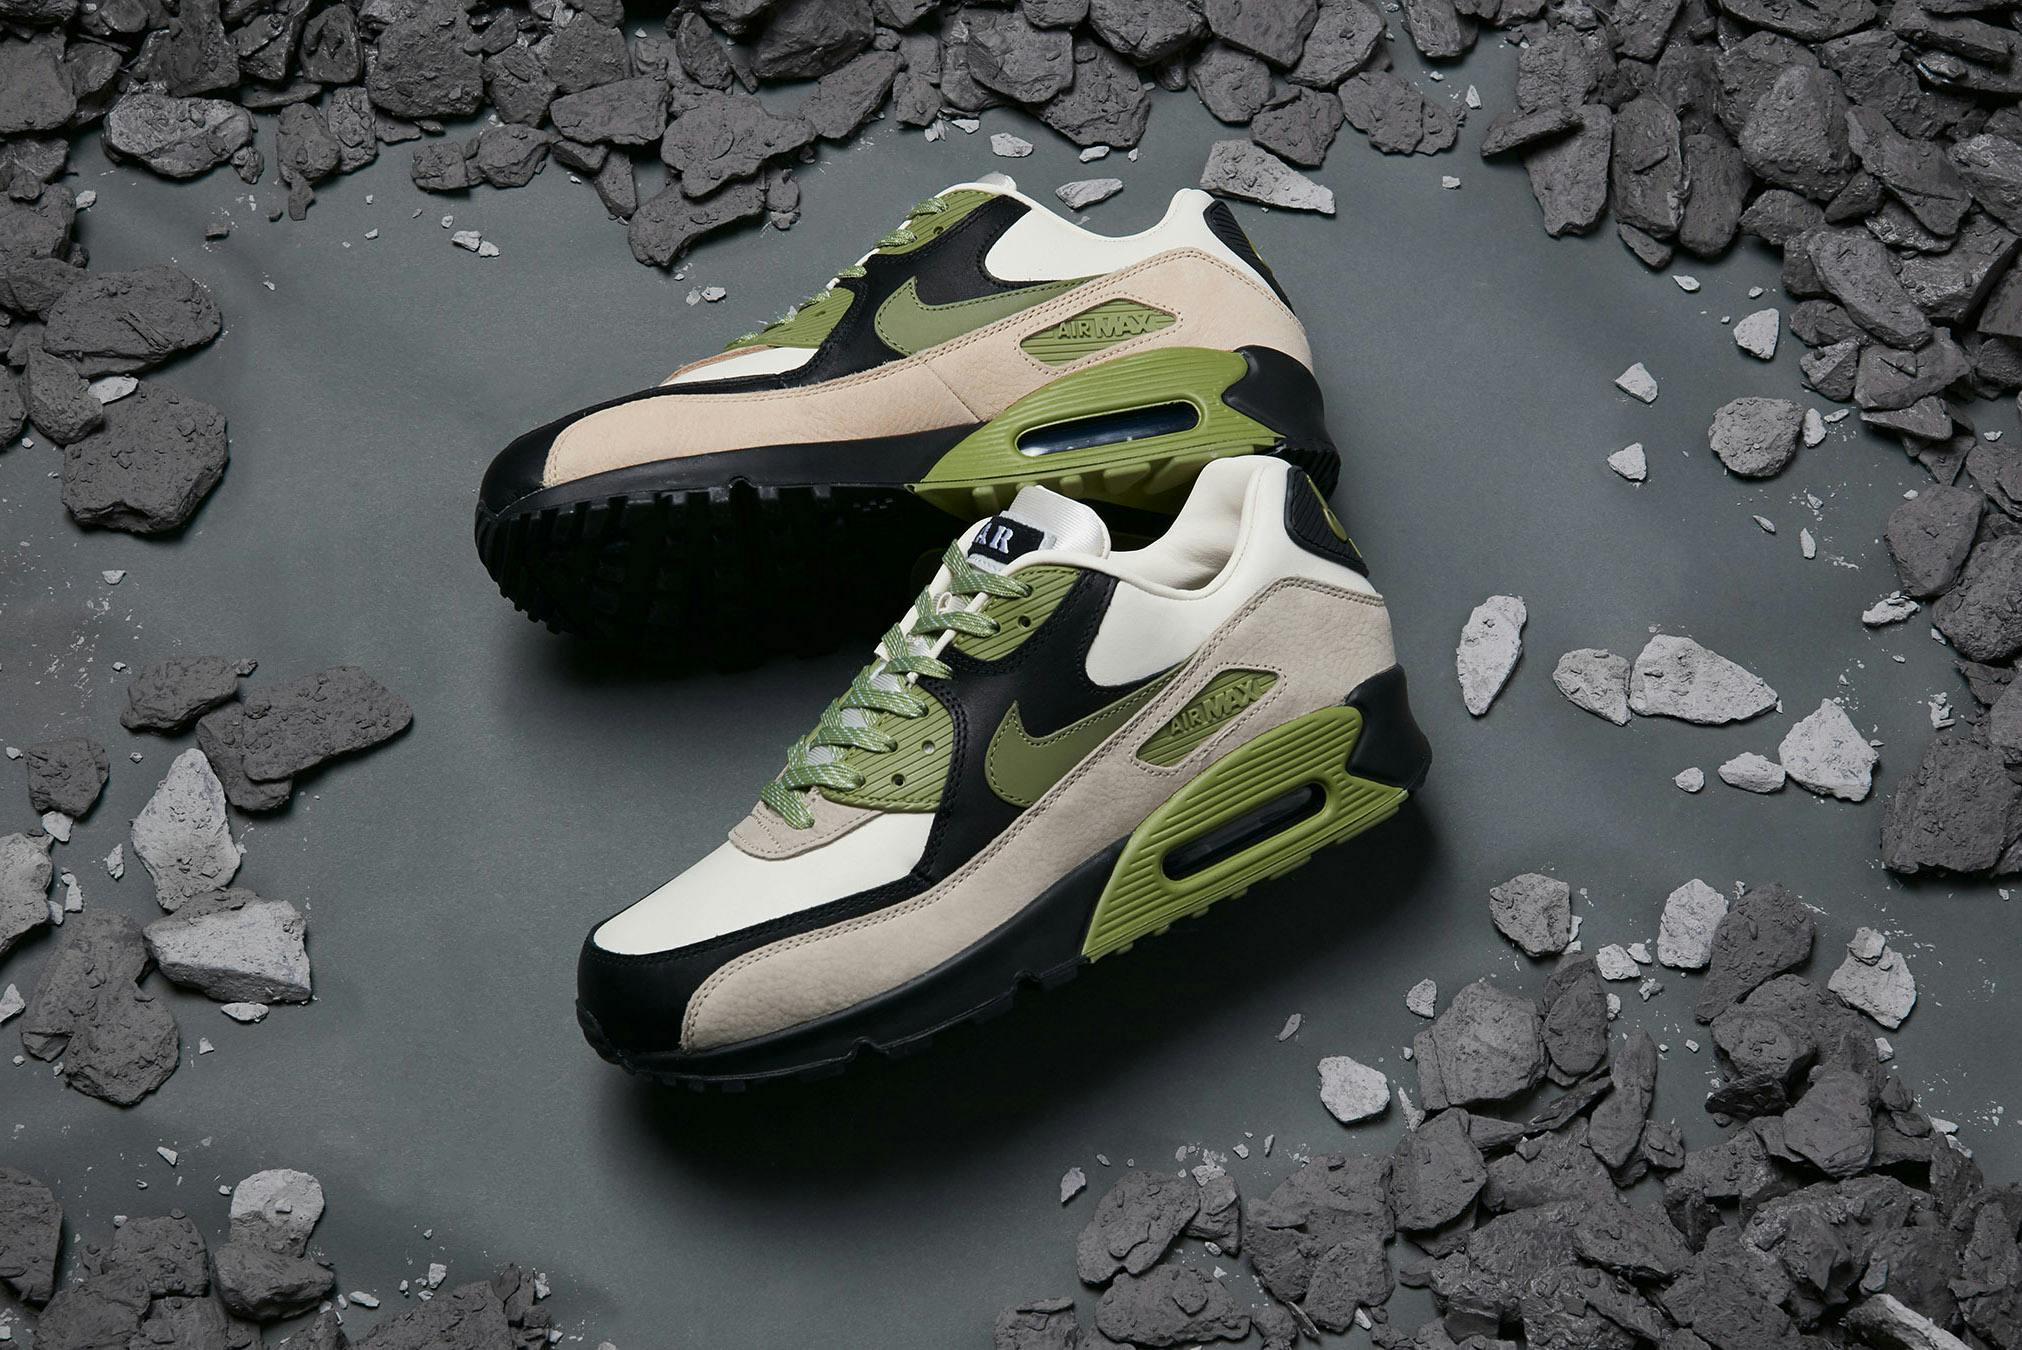 Nike Air Max 90 - Register Now on END. (SG) | END.